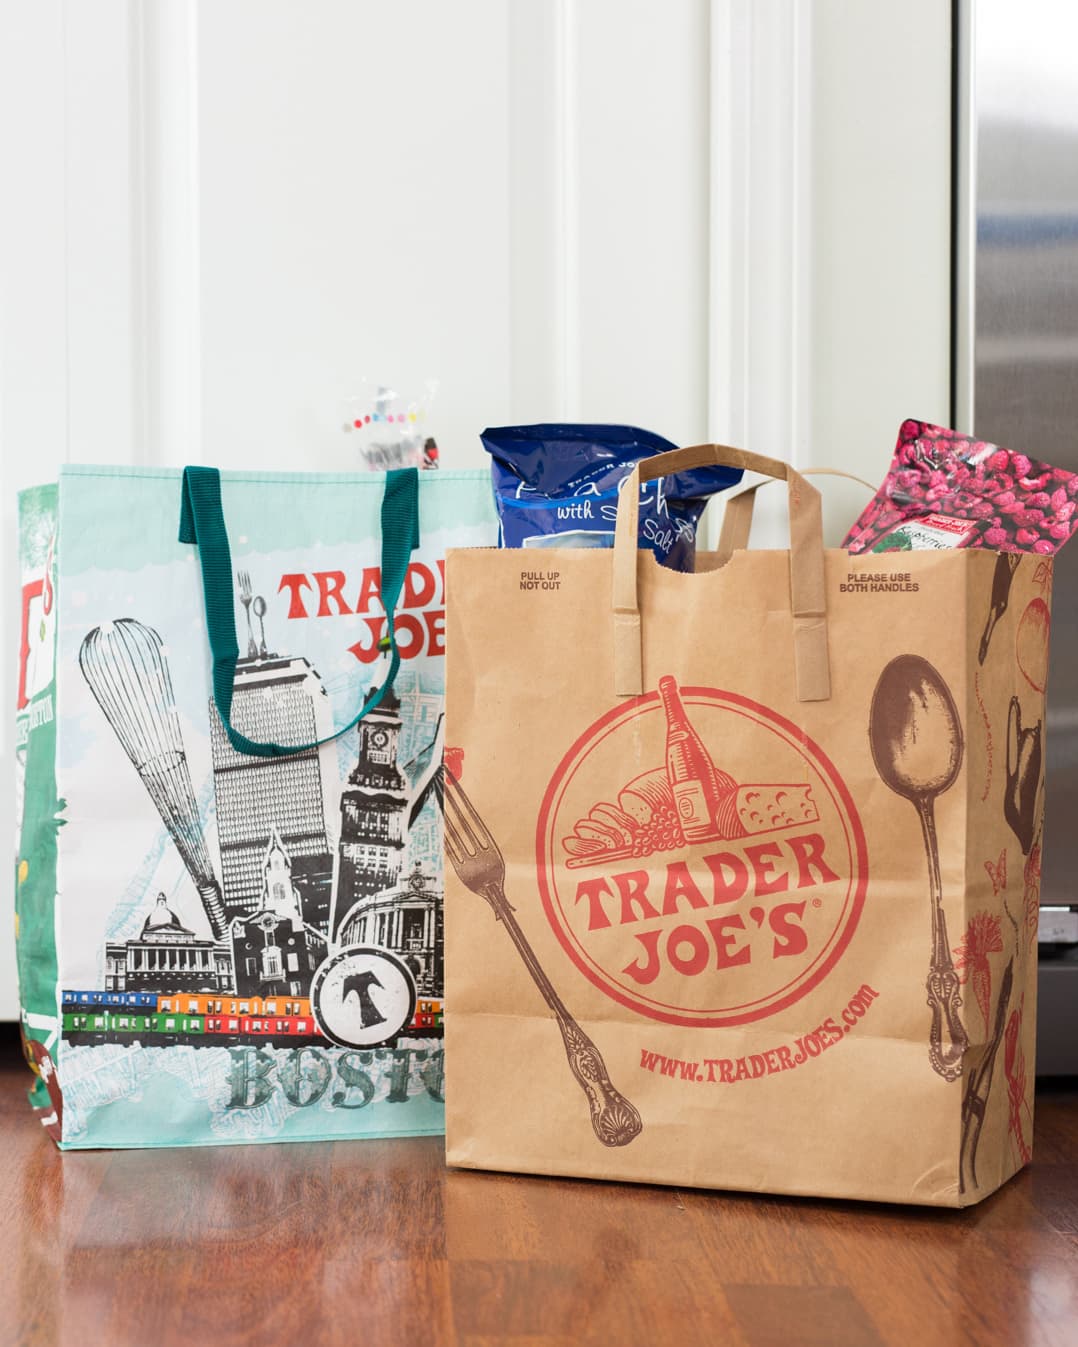 12 LOT/Count Trader Joe's Brown Paper Grocery Shopping Bag